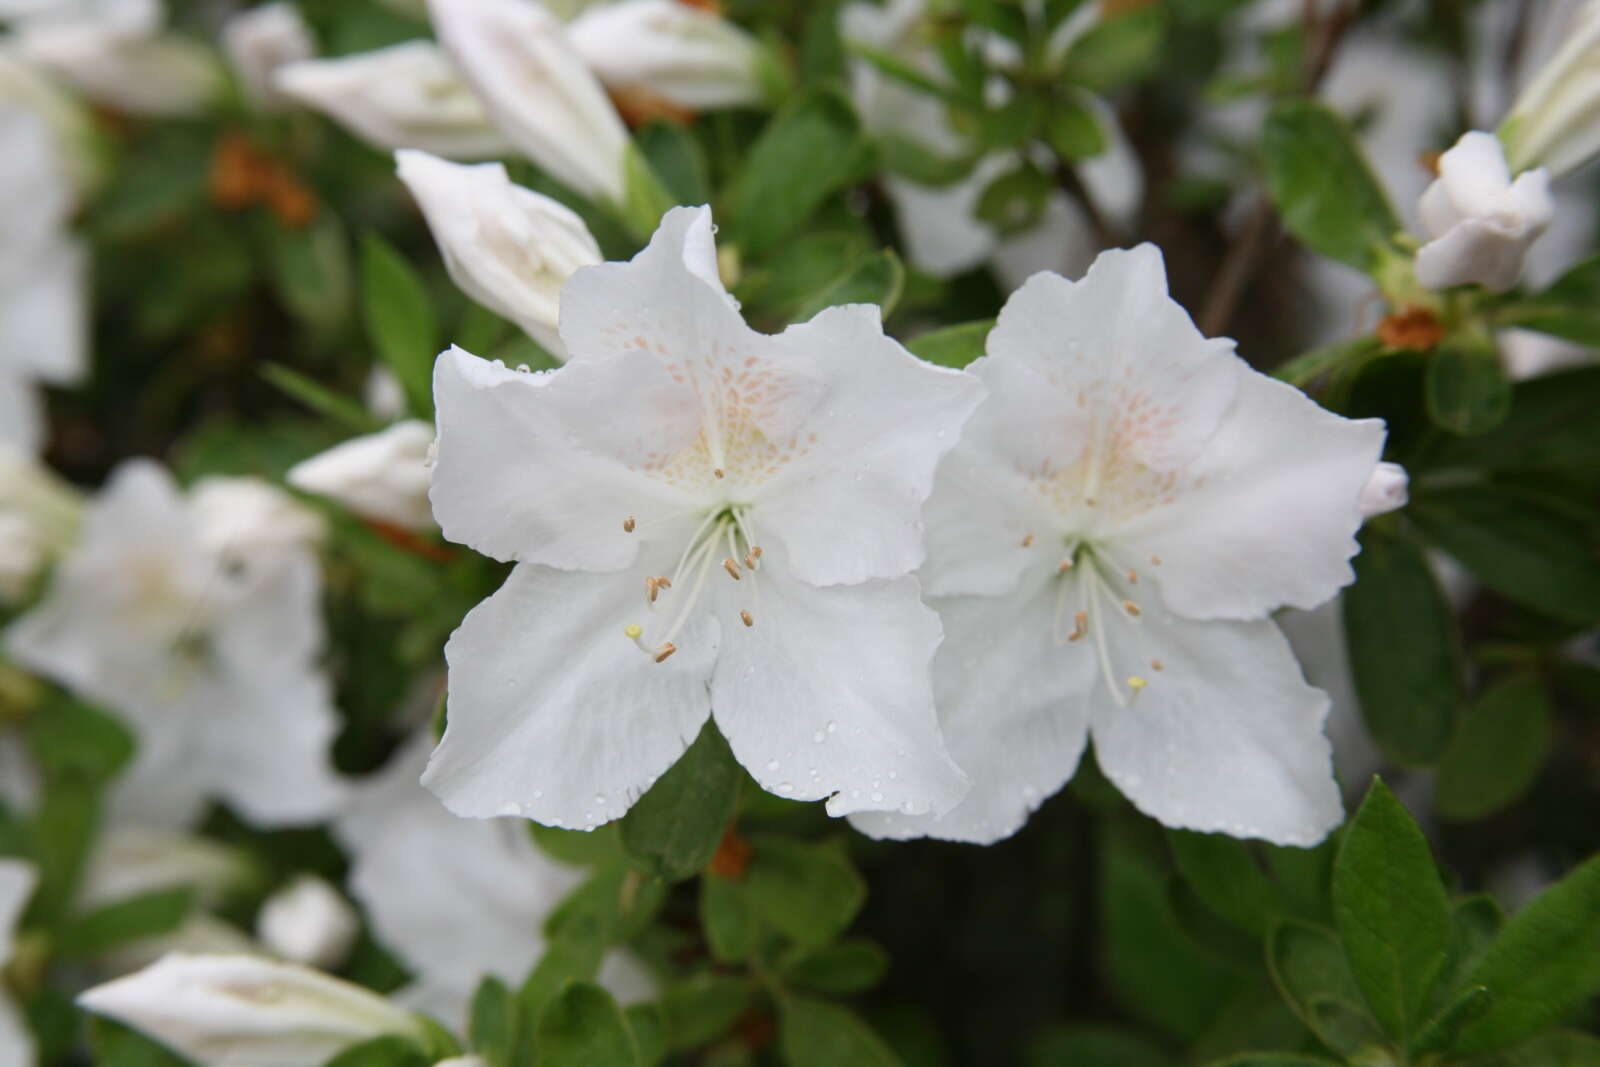 Image of Rhododendron mucronatum (Bl.) G. Don